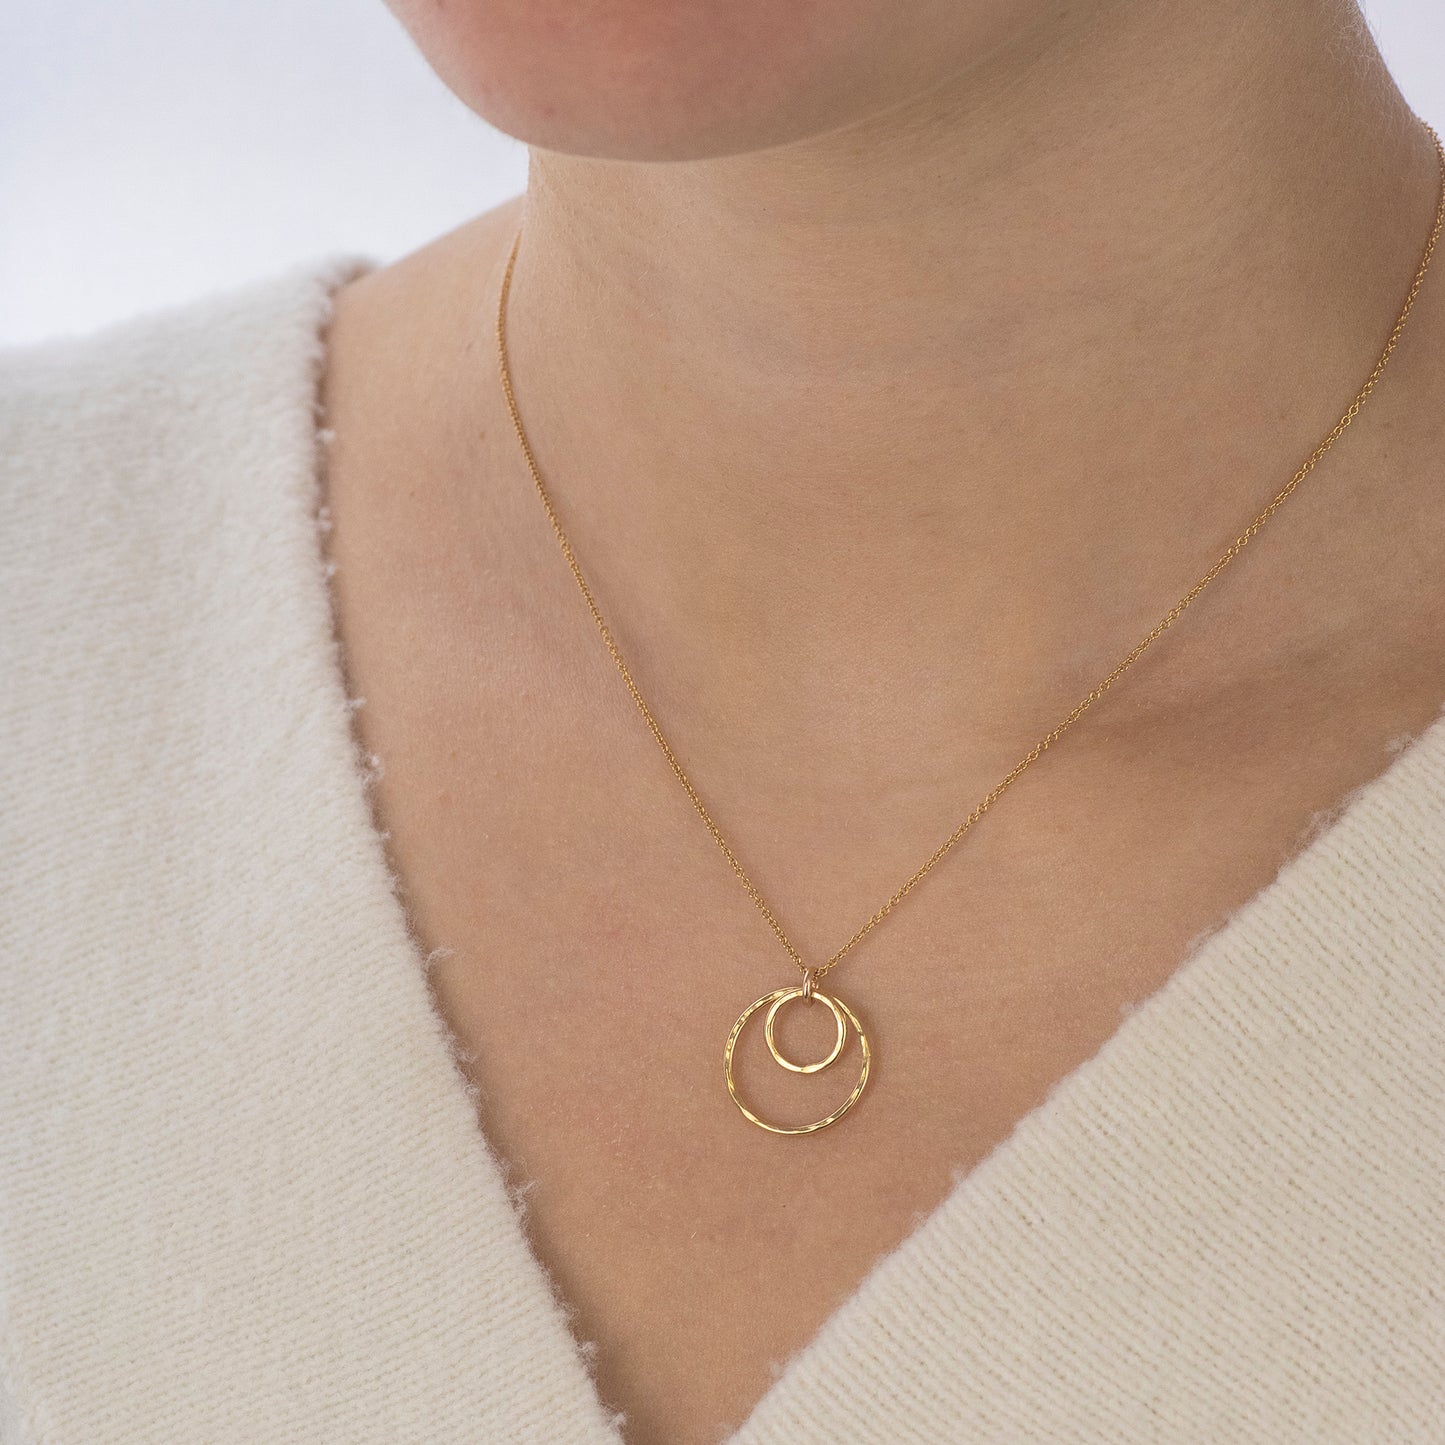 Mother Daughter Necklace for Mum - A Ring for Each of Us - Silver & Gold